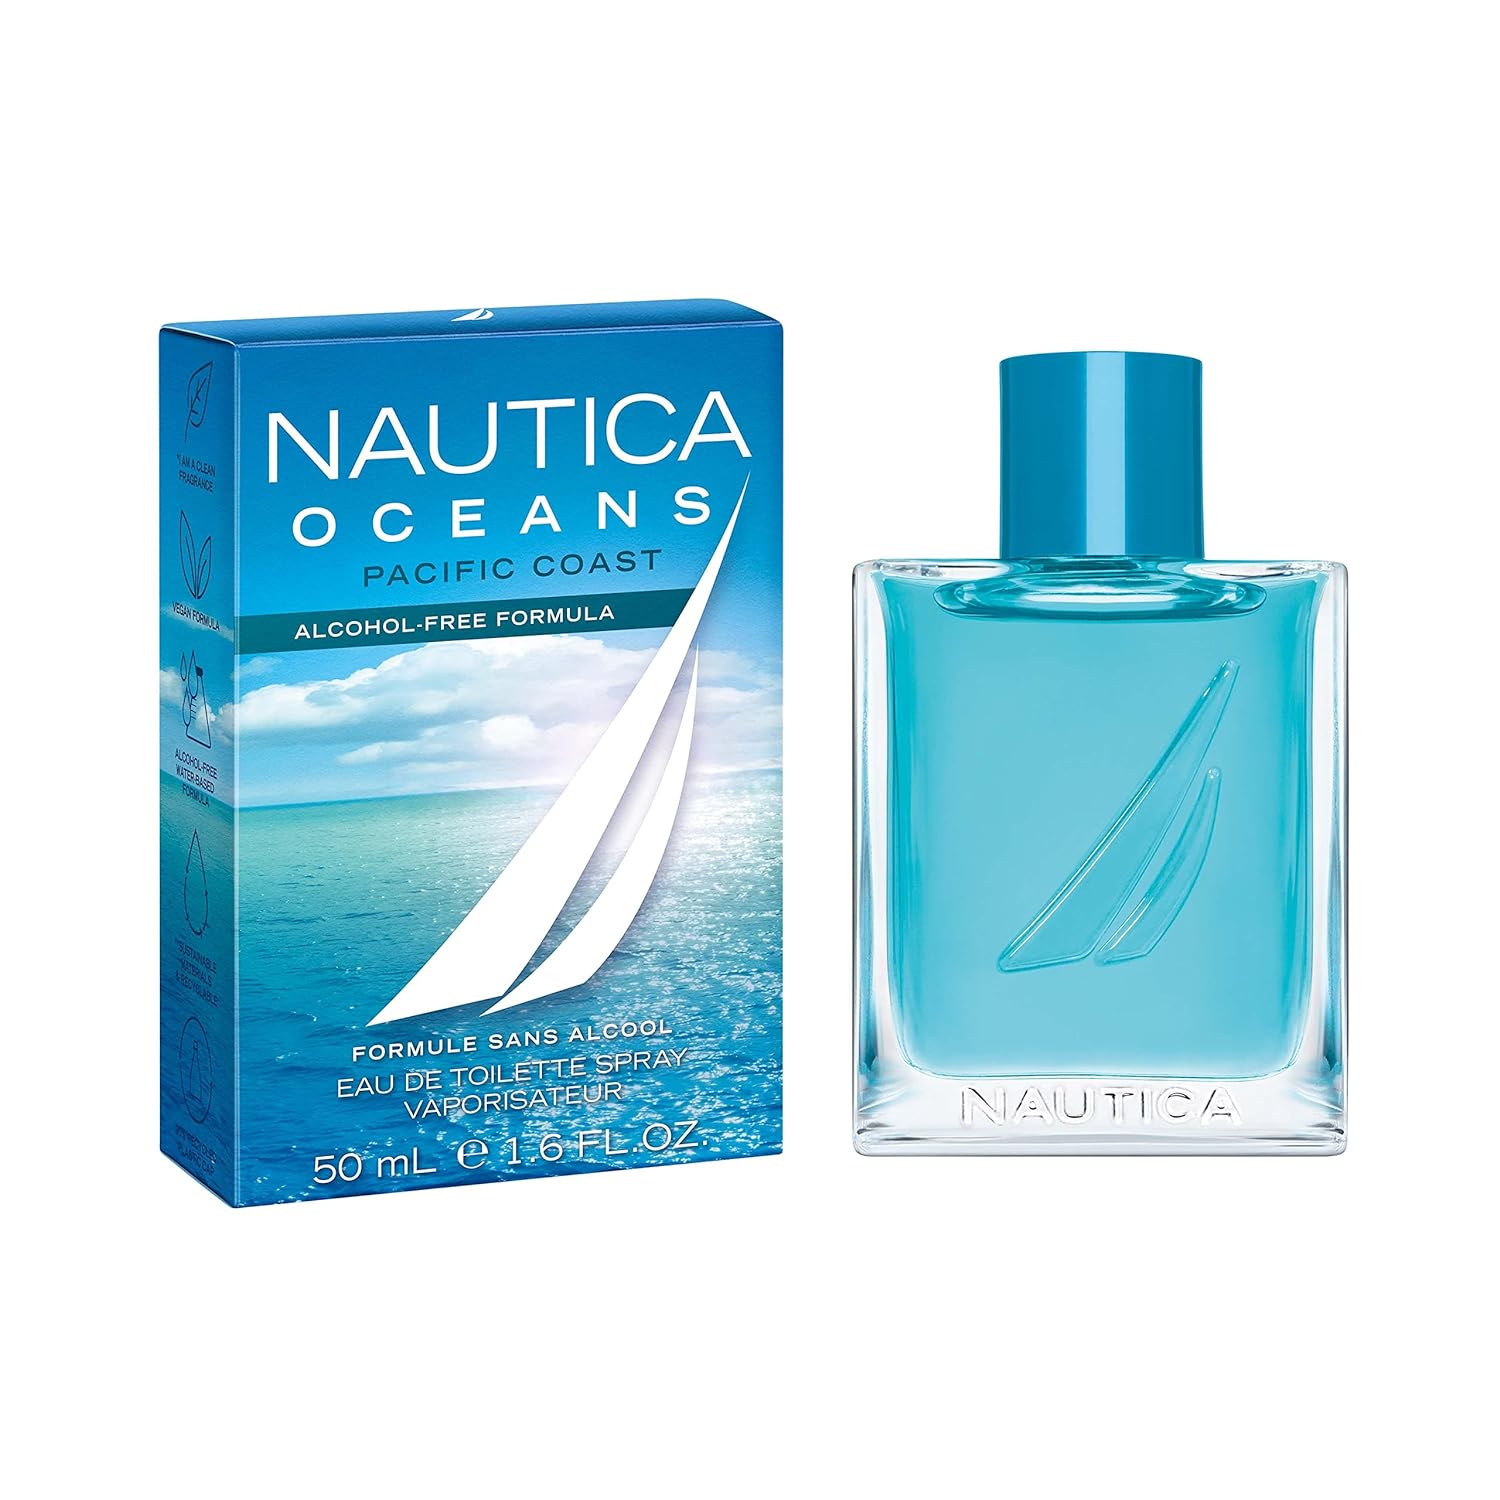 Nautica Oceans Pacific Coast Eau De Toilette - Uplifting, Refreshing Scent - Earthy, Marine Notes of Pinewood and Mint - Ideal for Day Wear - 1.6 Fl Oz